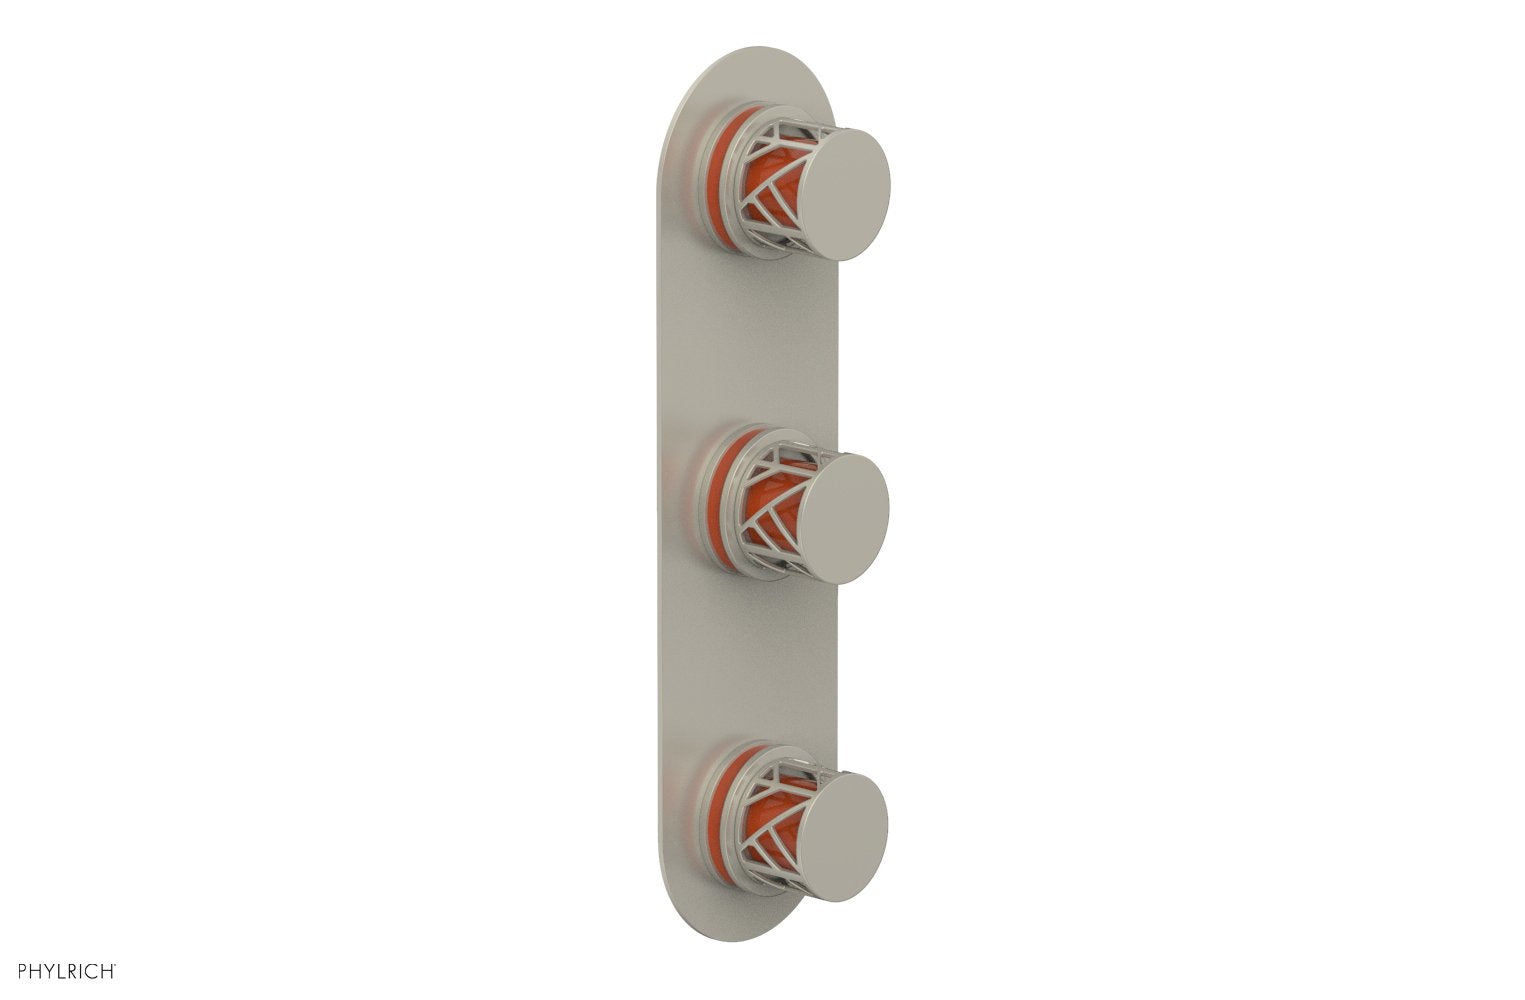 Phylrich JOLIE Thermostatic Valve with Two Volume Control with "Orange" Accents